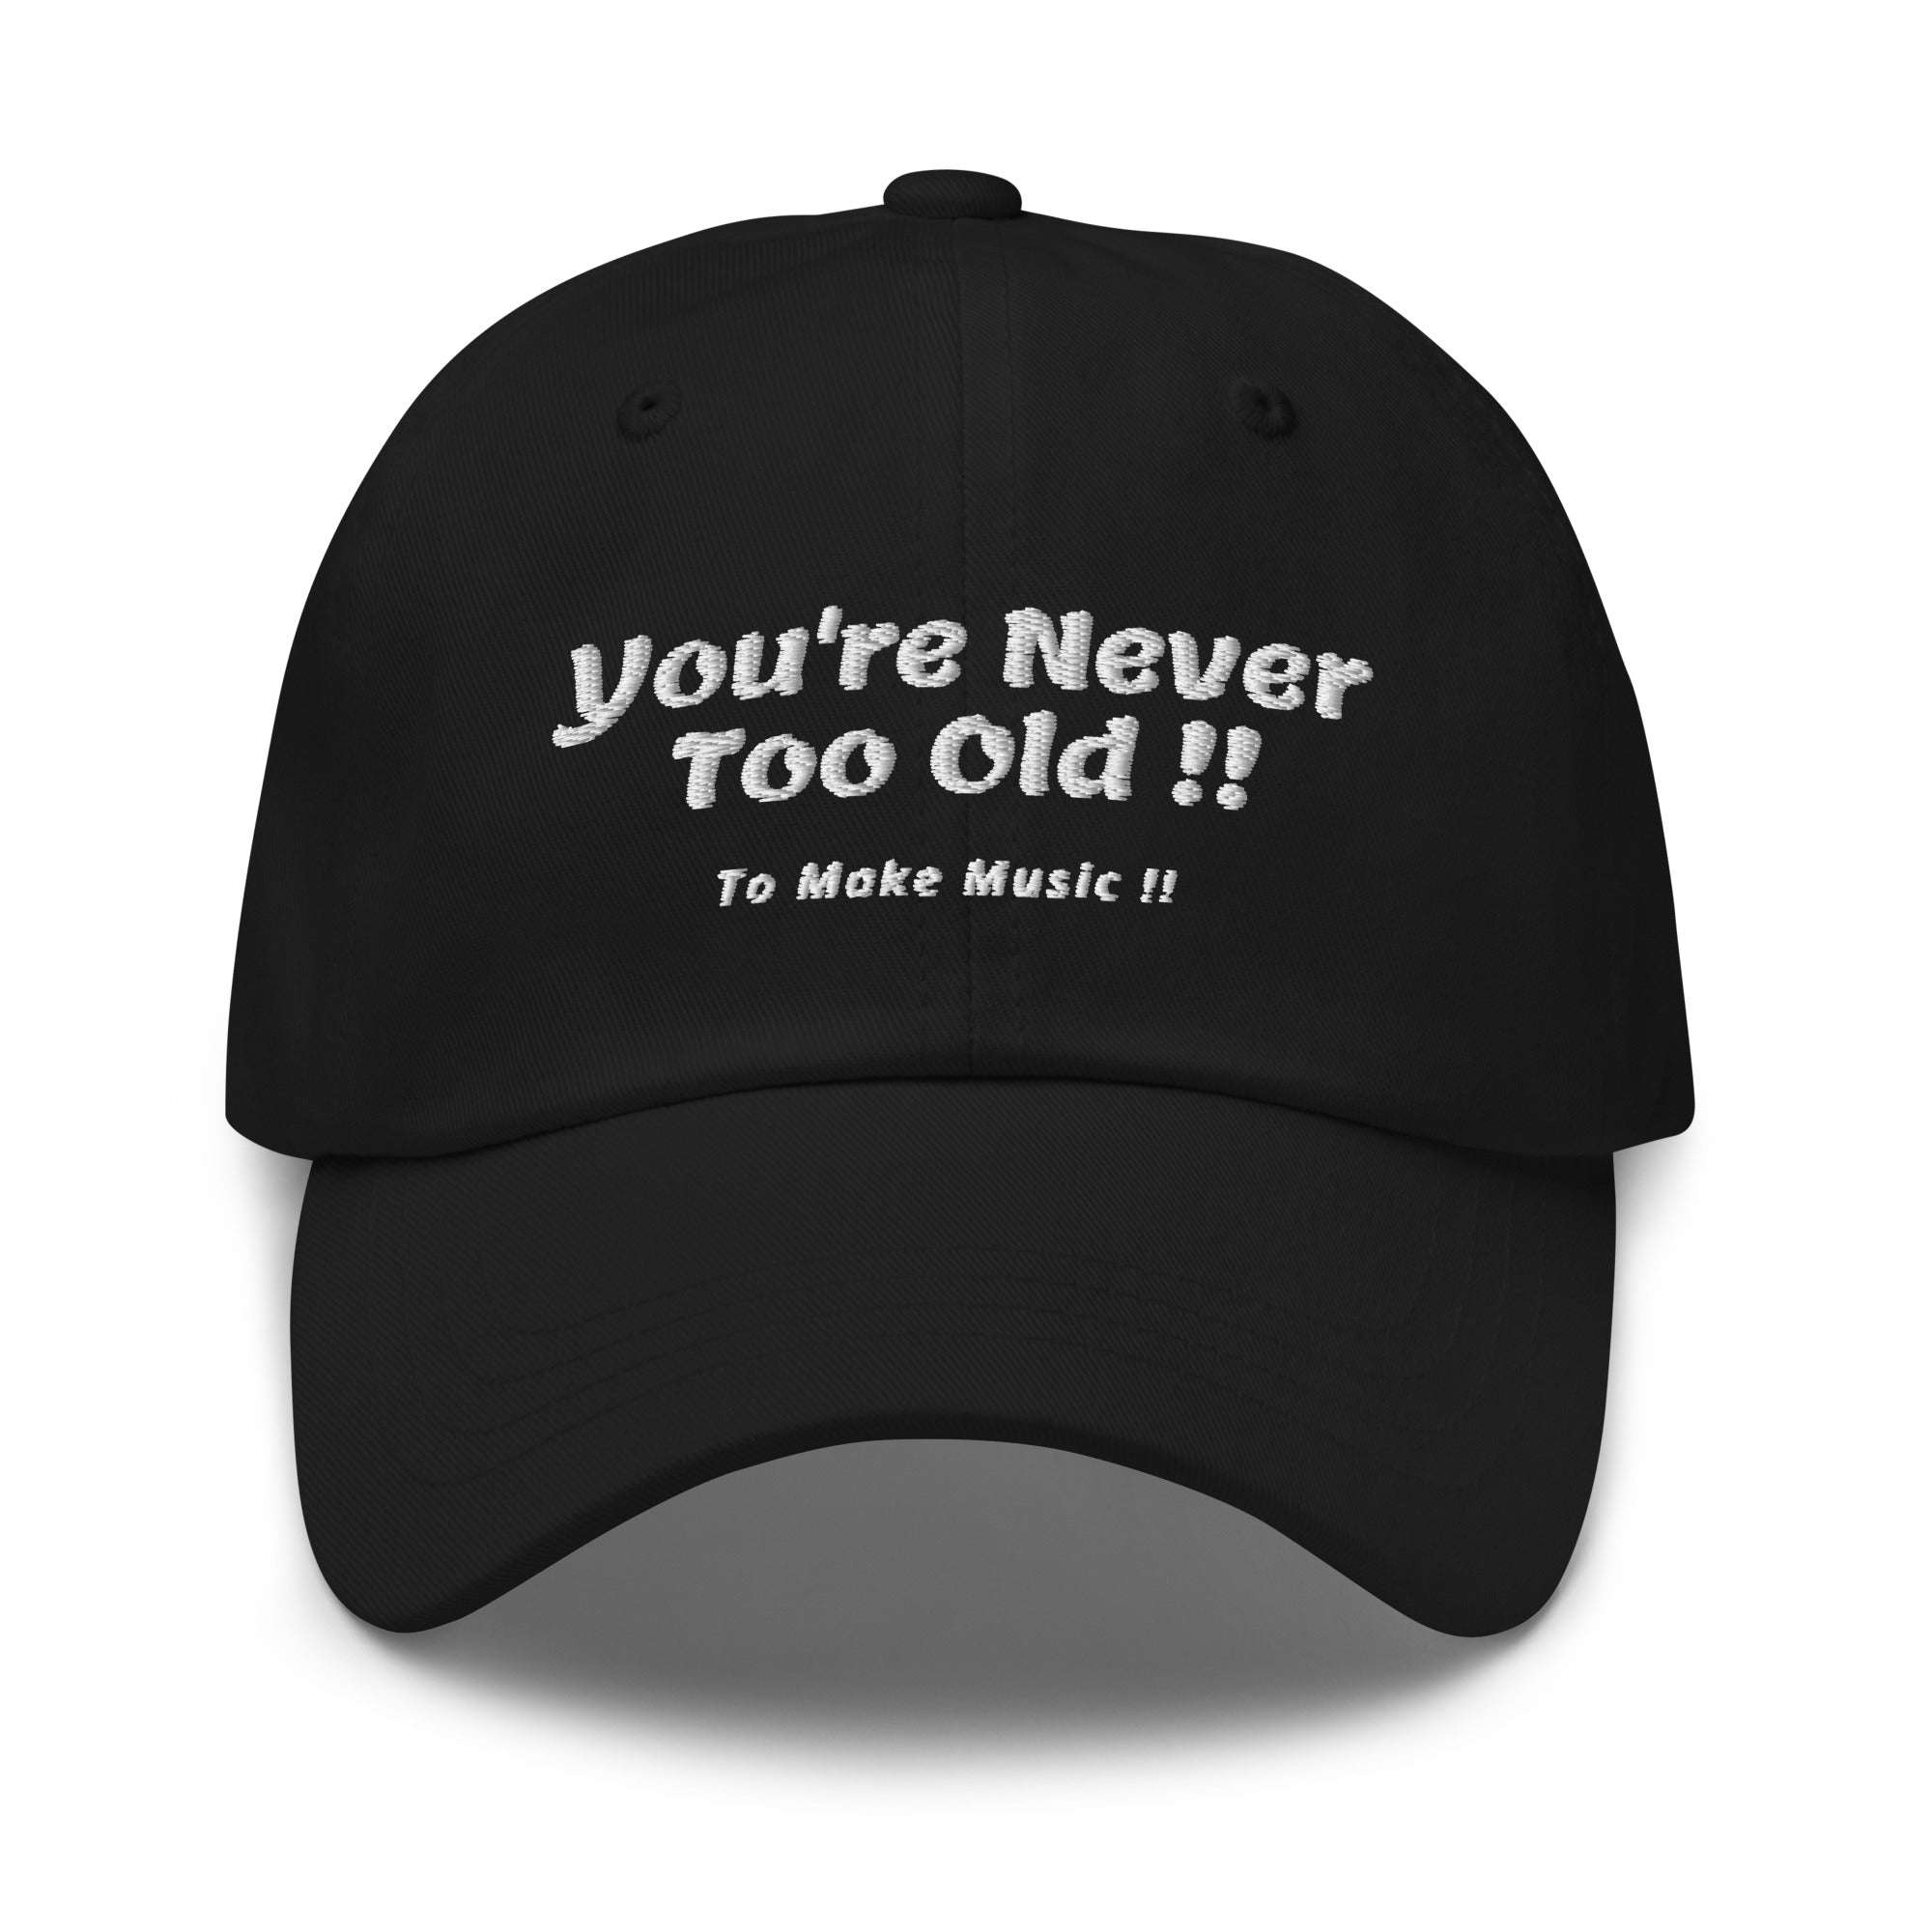 Hats - From $23.00